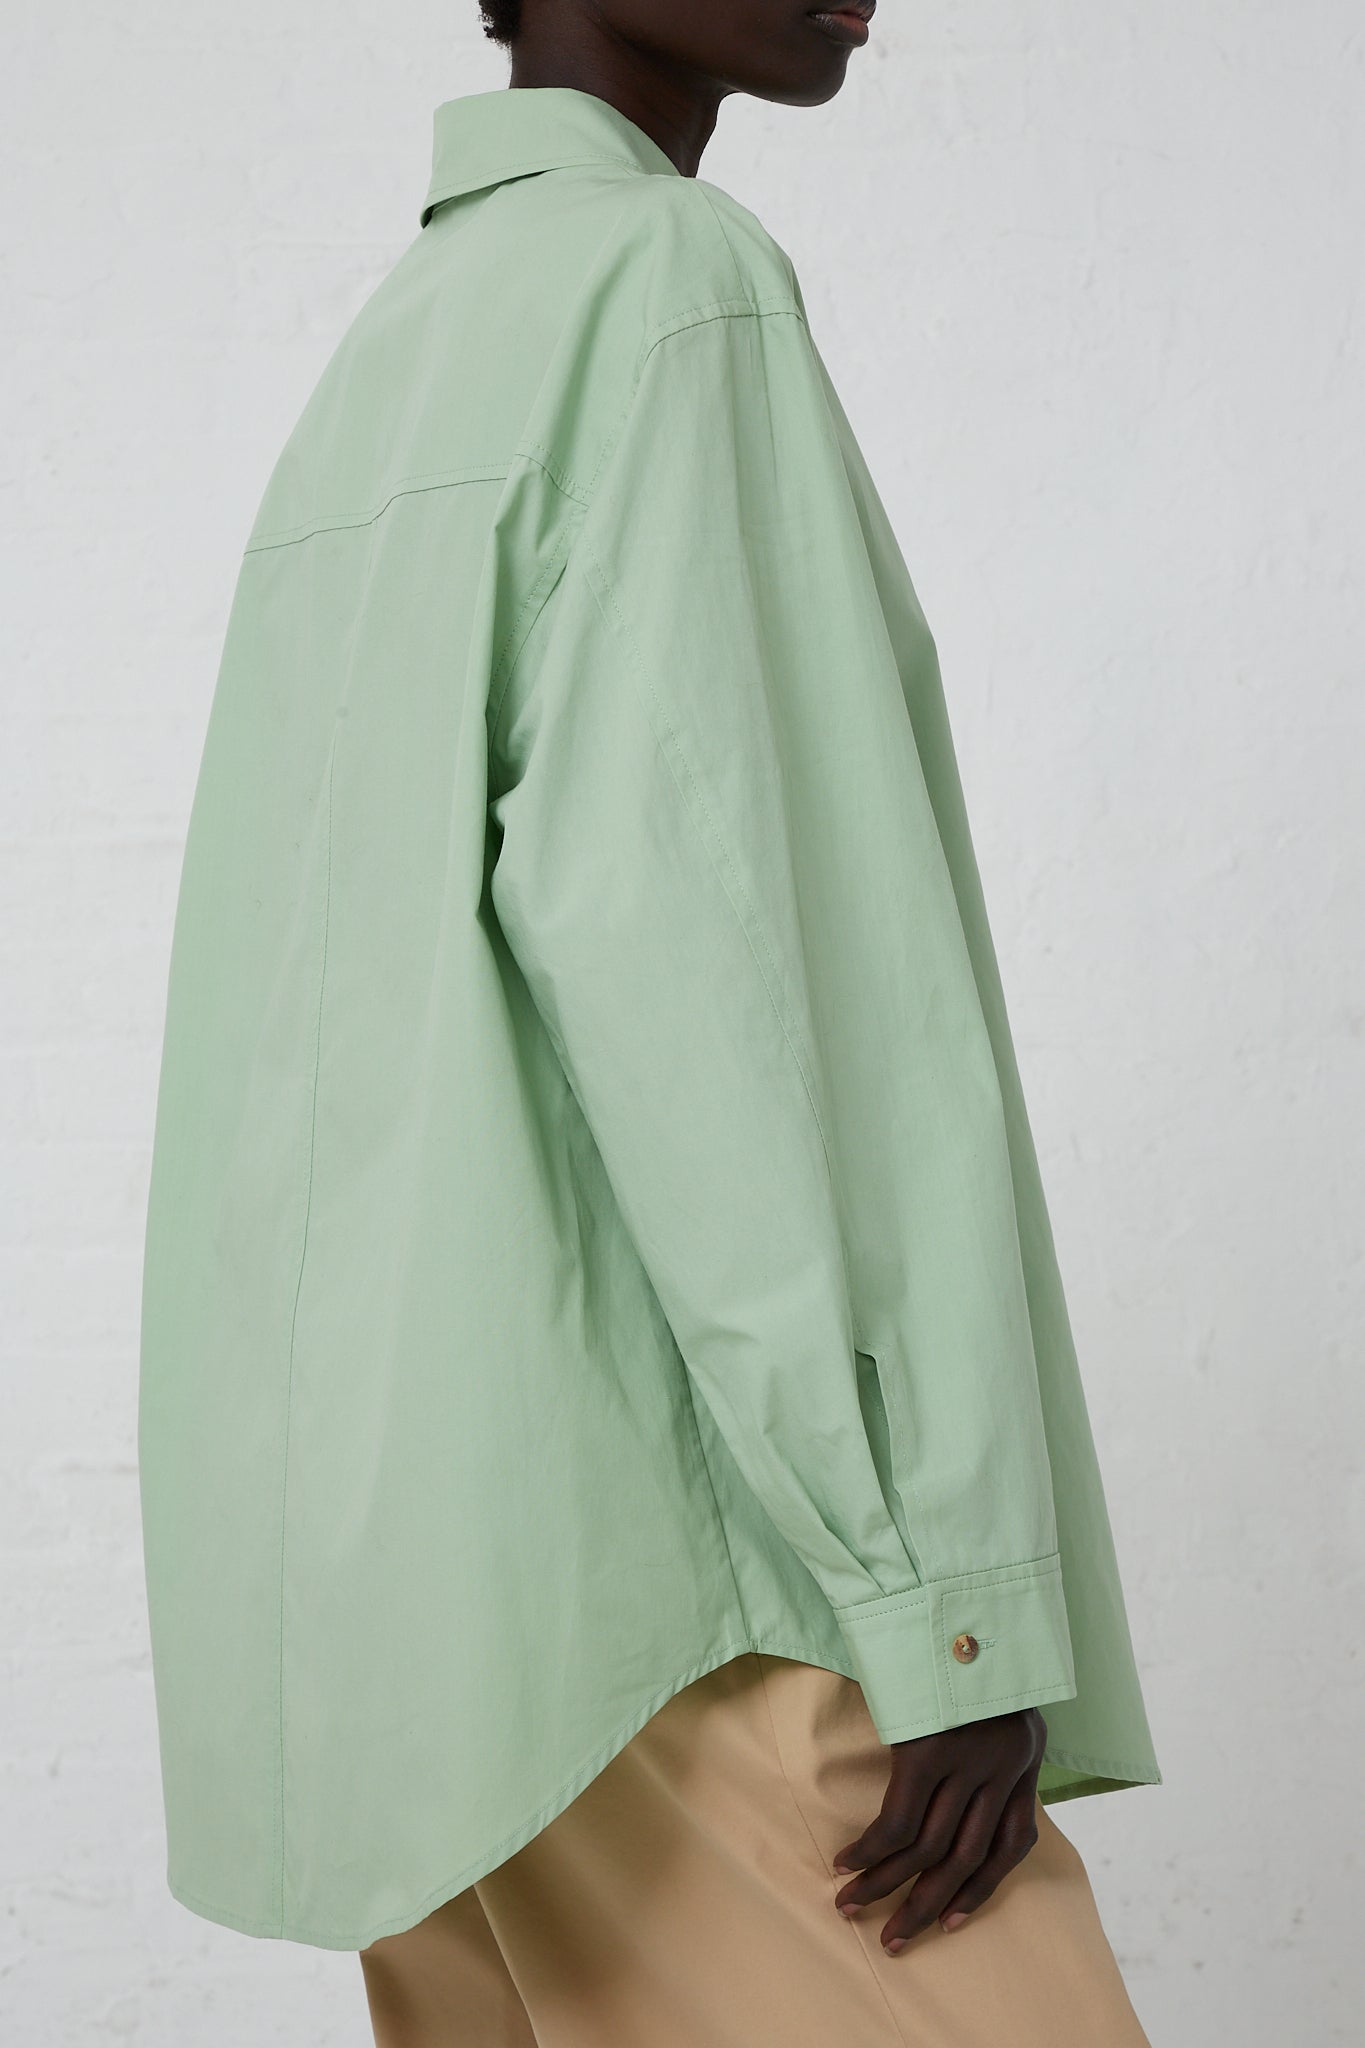 The back of a woman wearing an Organic Cotton Caprice Shirt in Mint by Rejina Pyo with a front button closure.